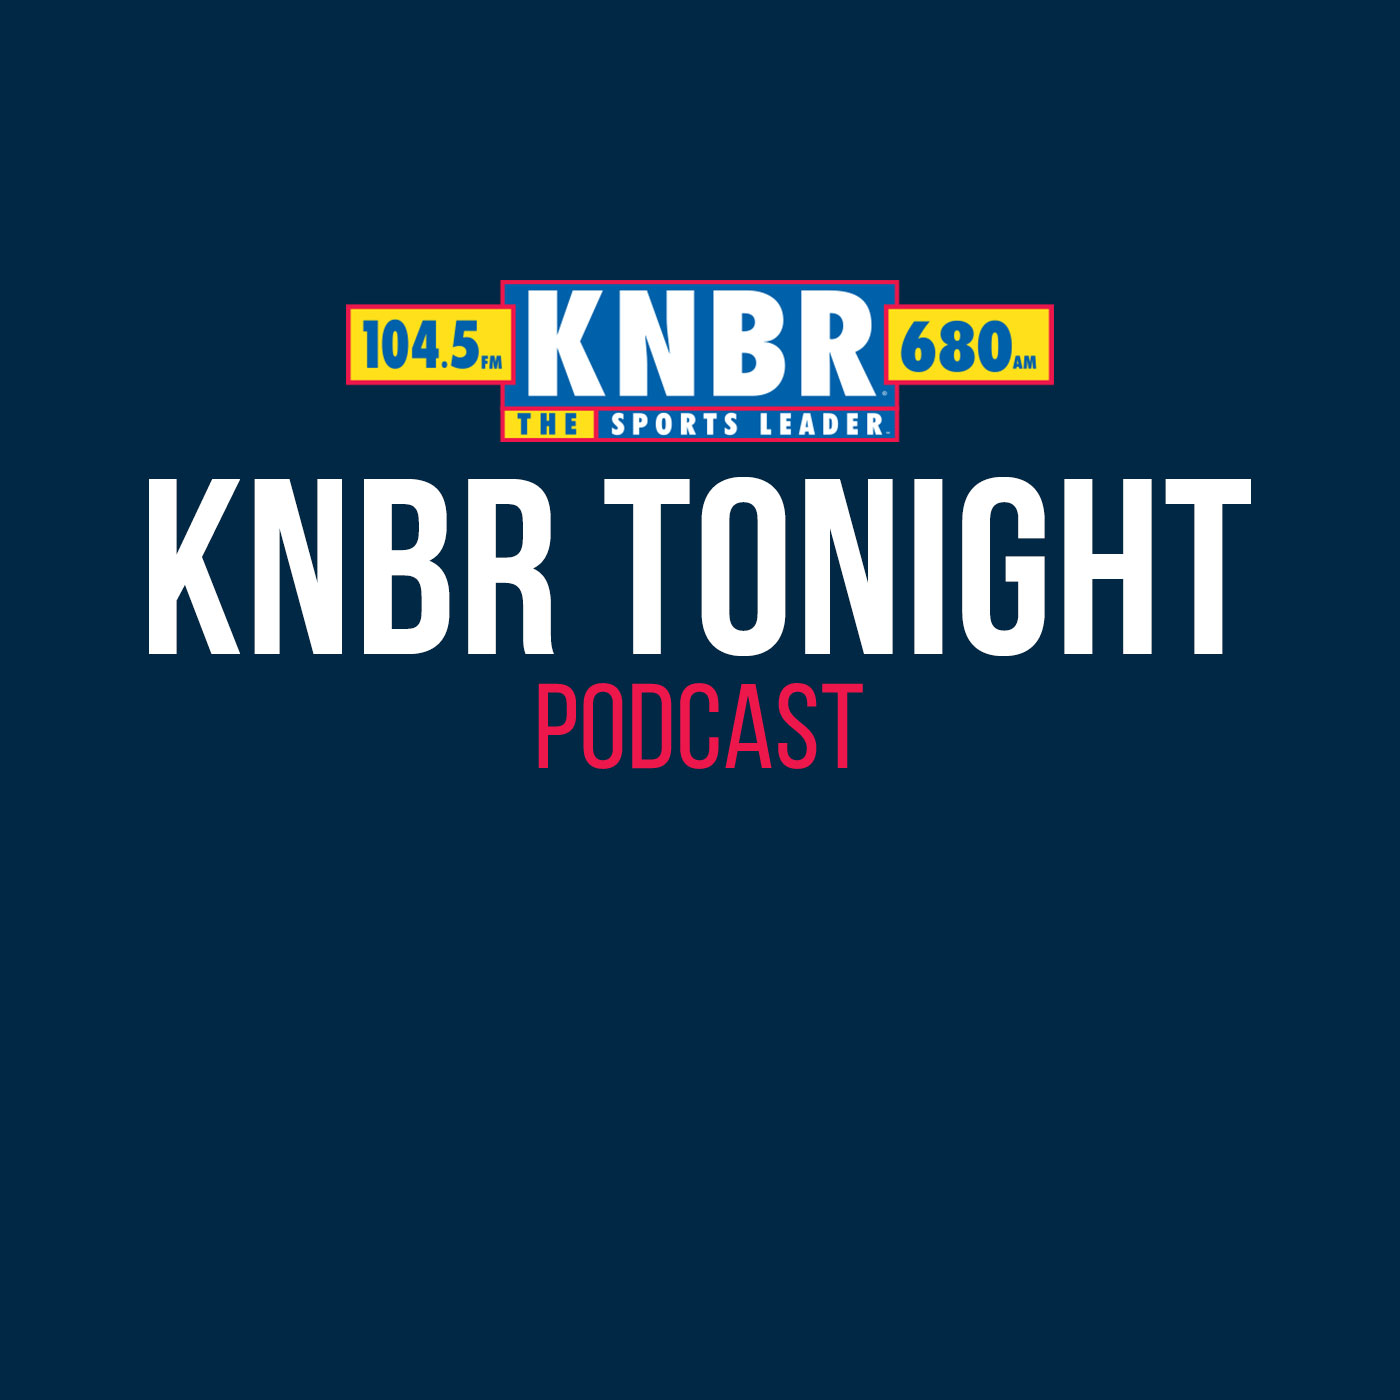 1-31 KNBR Insider Jake Hutchinson Joins Dieter to Break Down the NFC Championship Game on KNBR Tonight